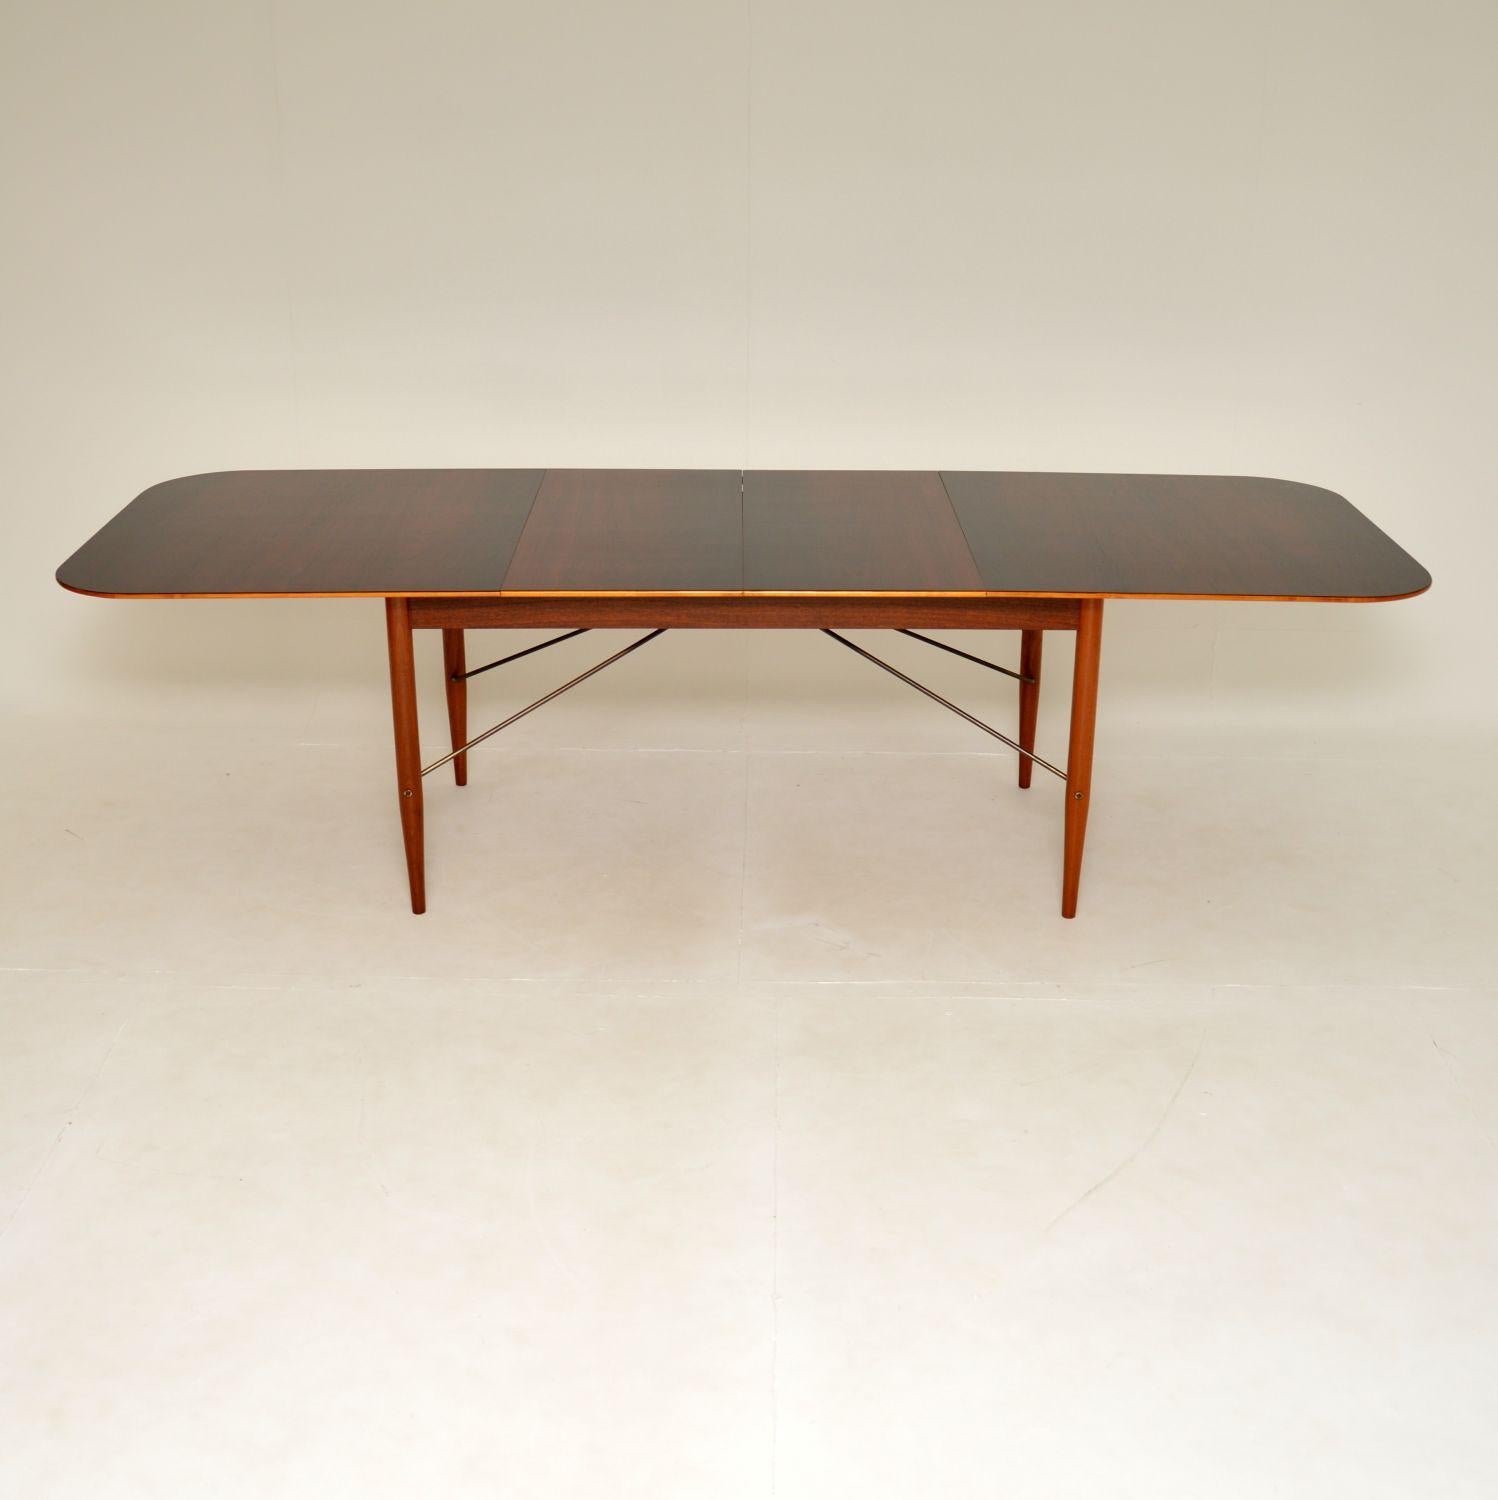 A stunning and extremely rare 1950’s dining table designed by Robin Day for Hille as part of the “Albermarle” range.

The quality is outstanding, this is beautifully made. There are two leaves that come with this so when fully opened, it is enormous